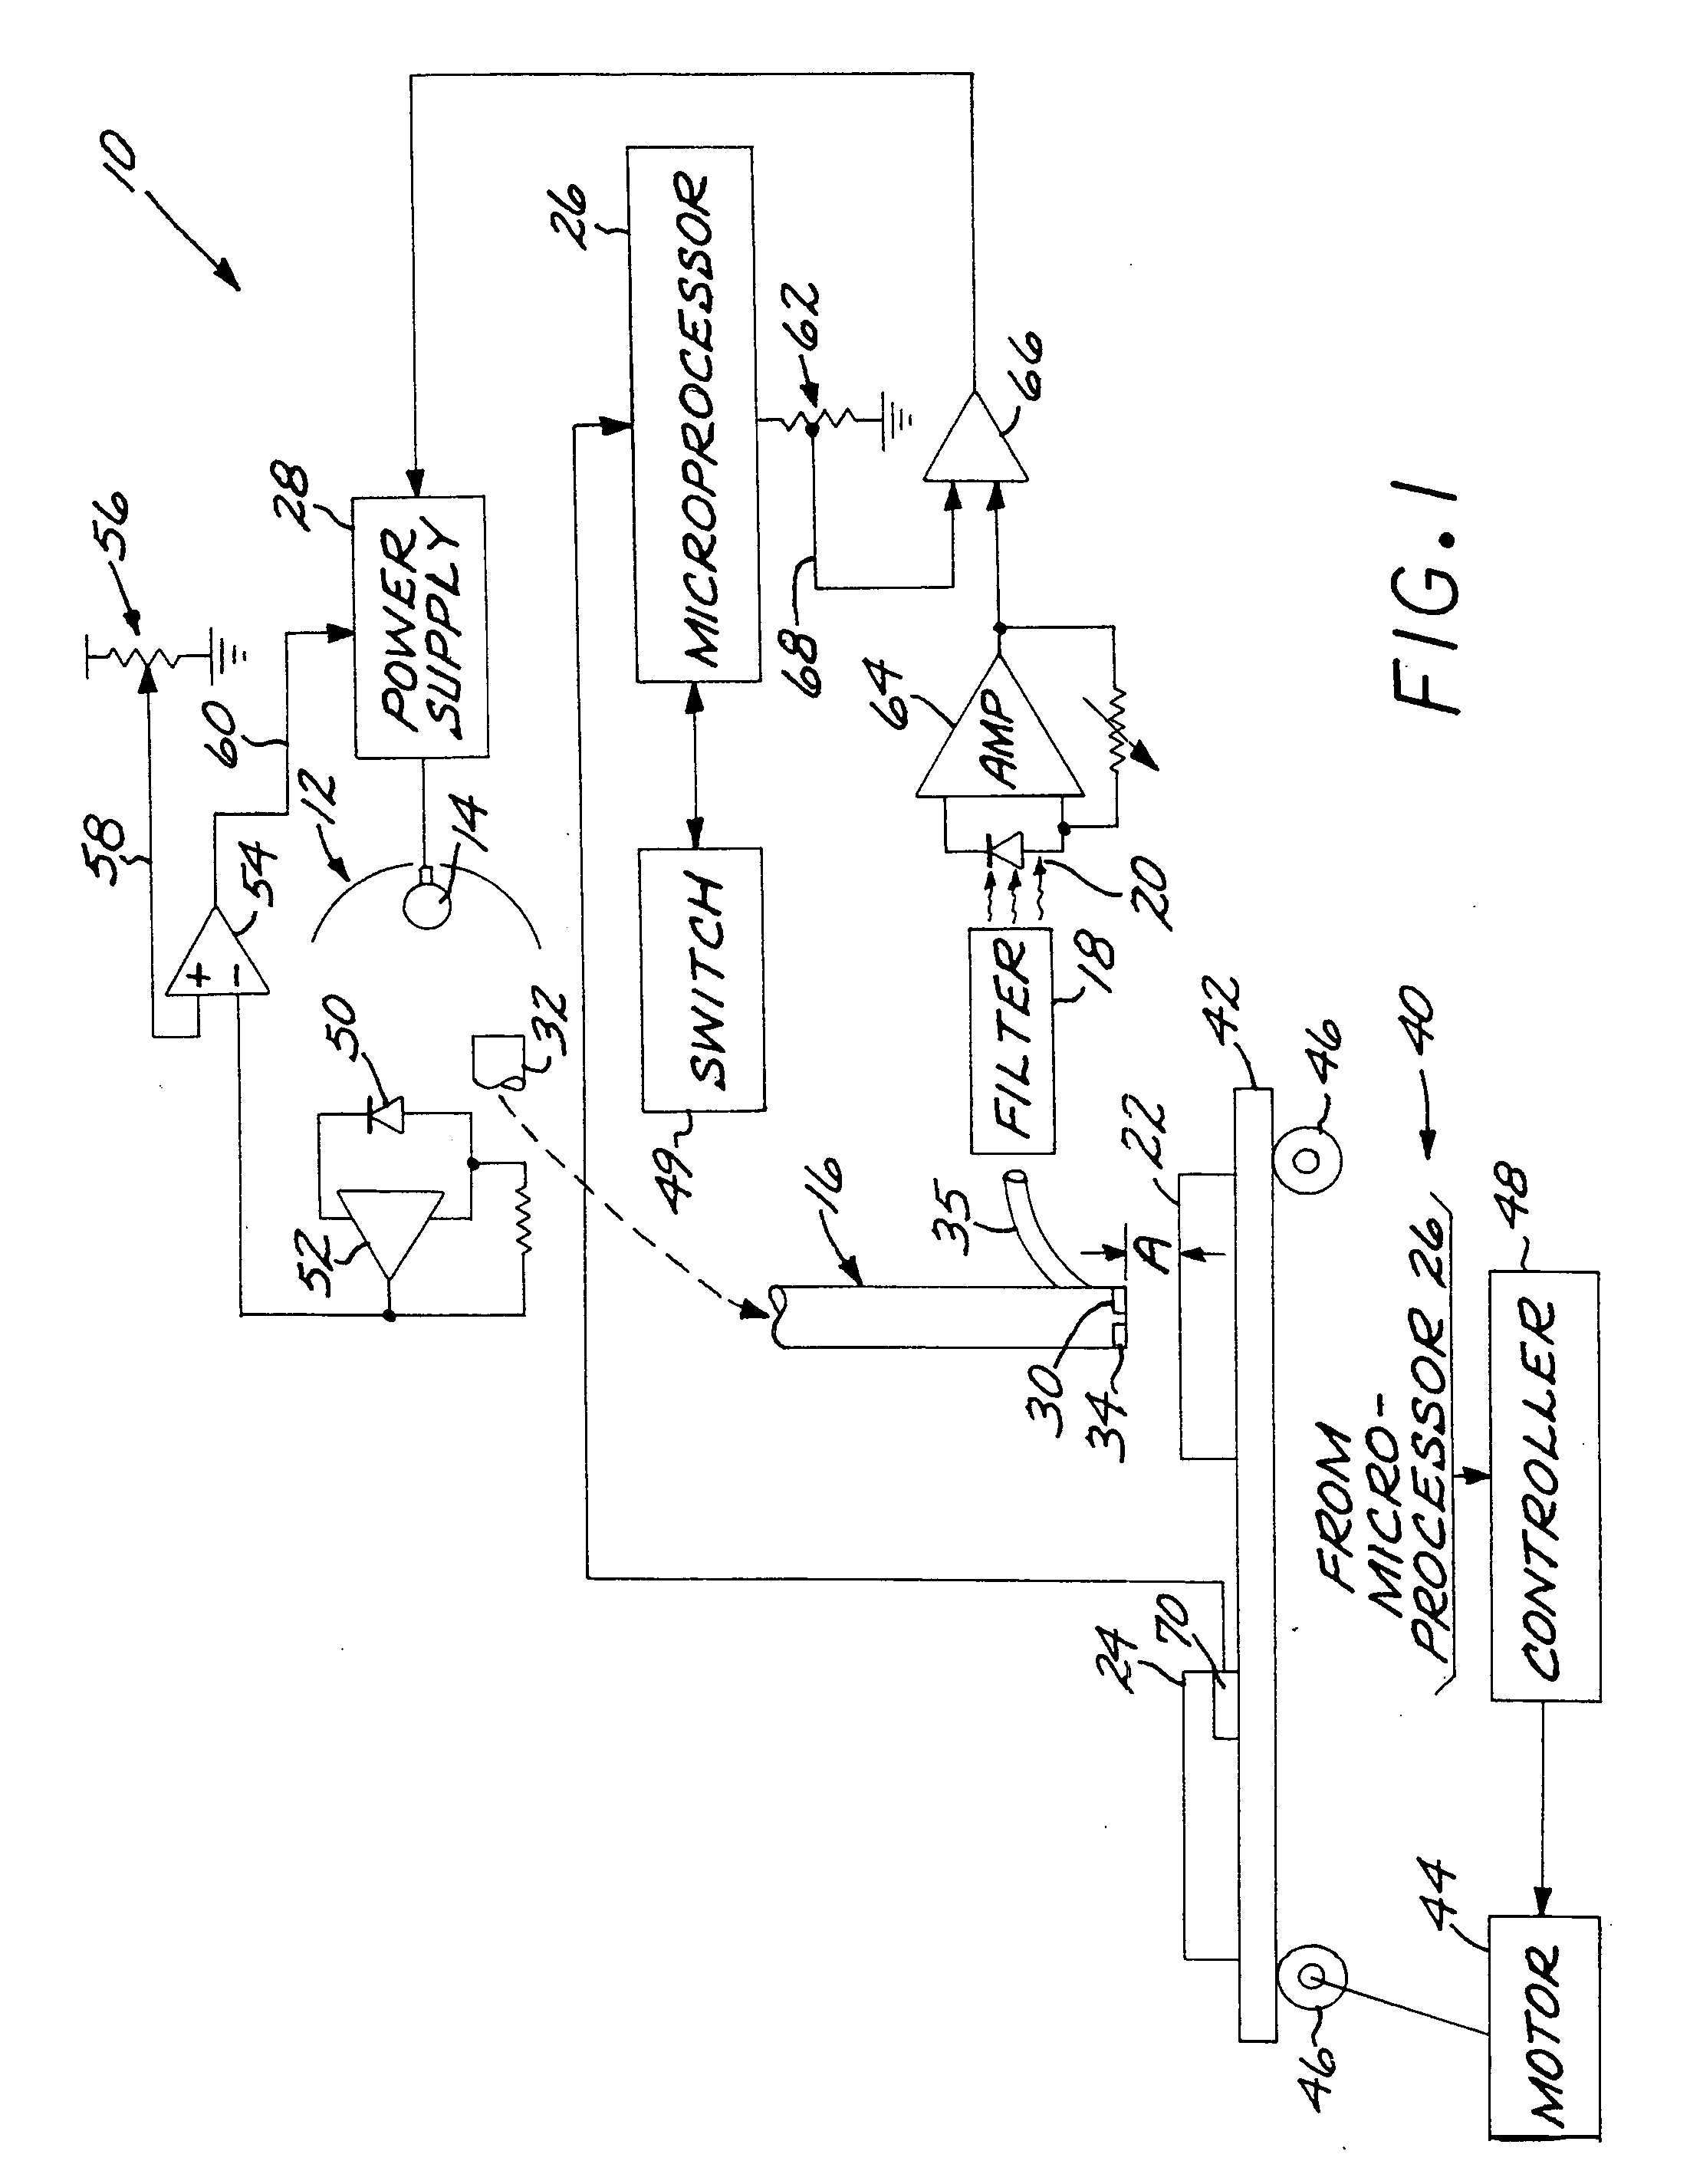 Method for sensing and controlling radiation incident on substrate